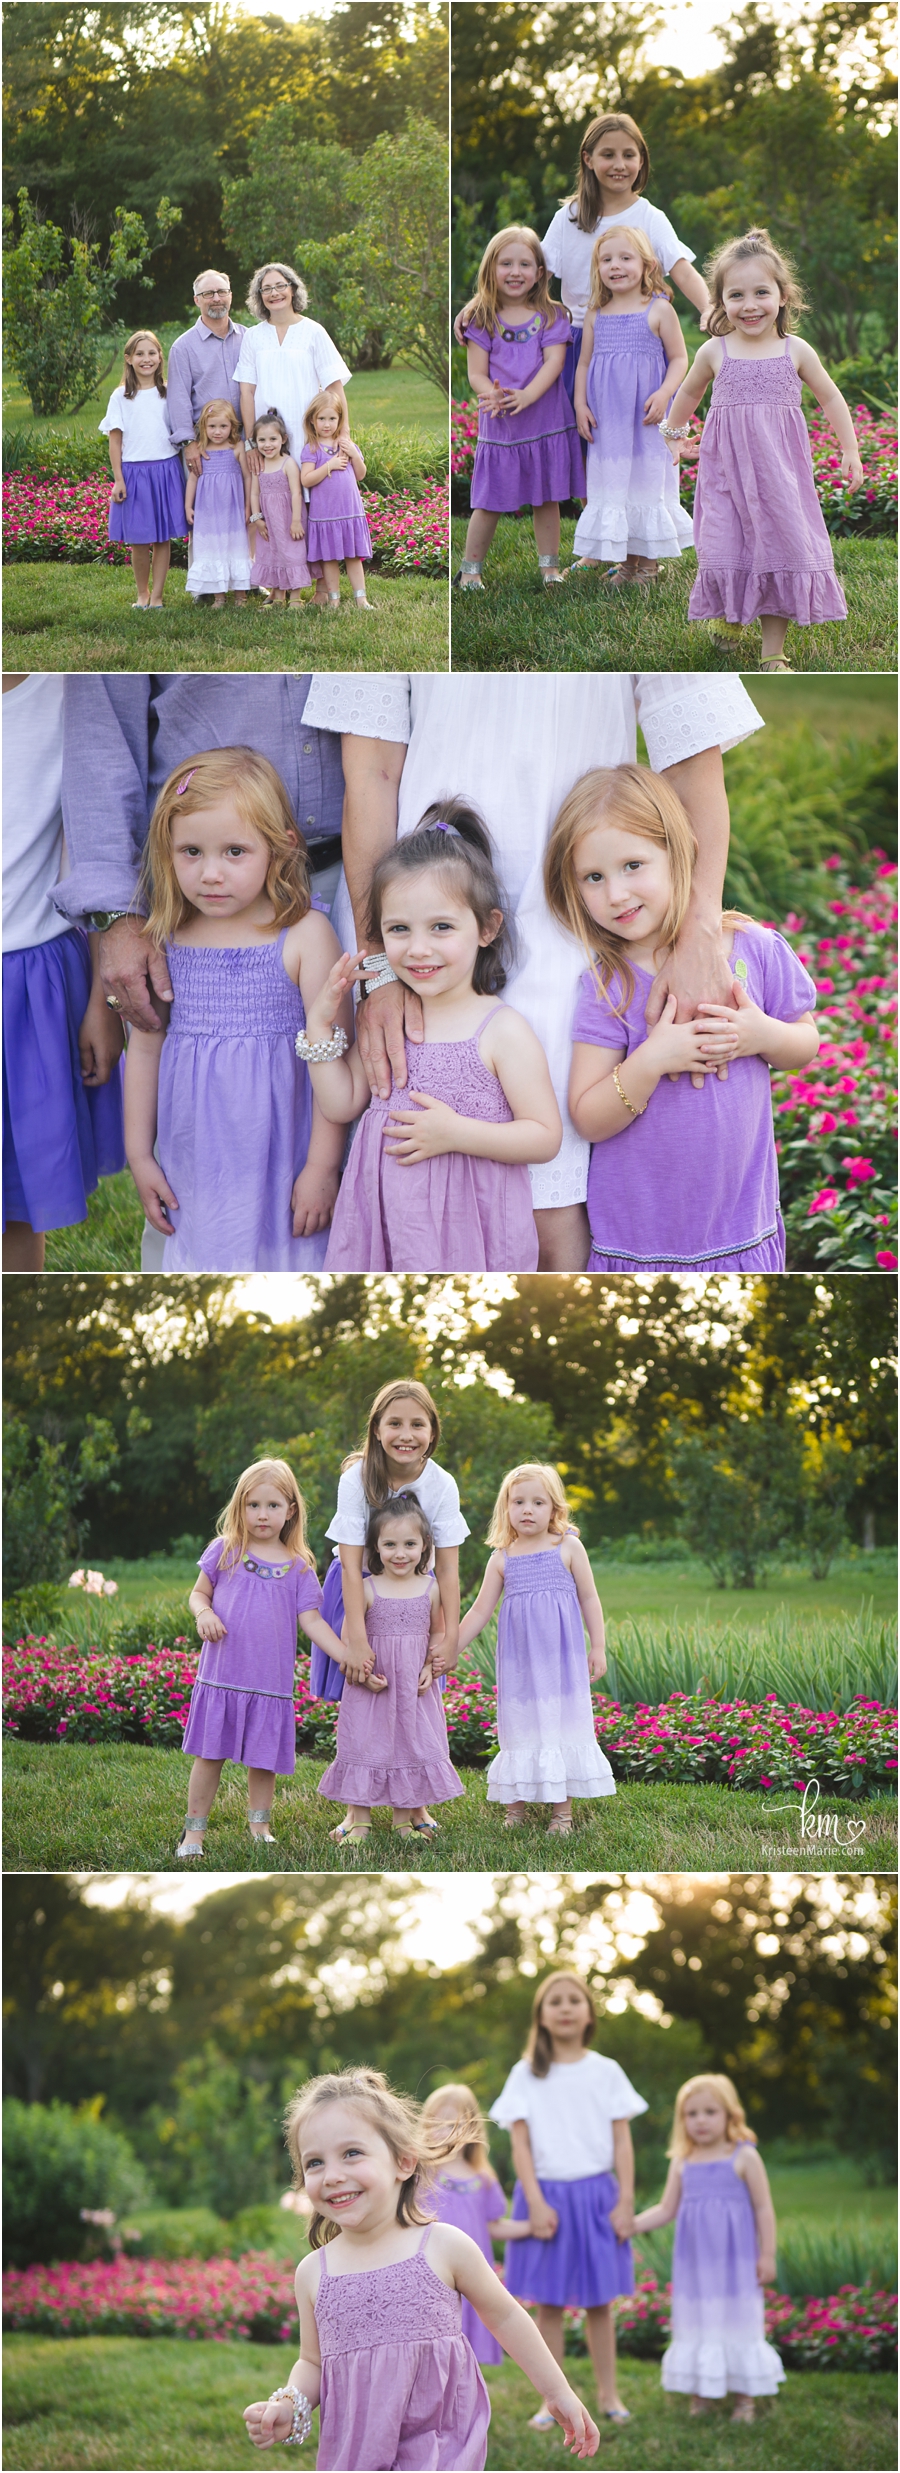 Family photography in a garden - Indianapolis family photography